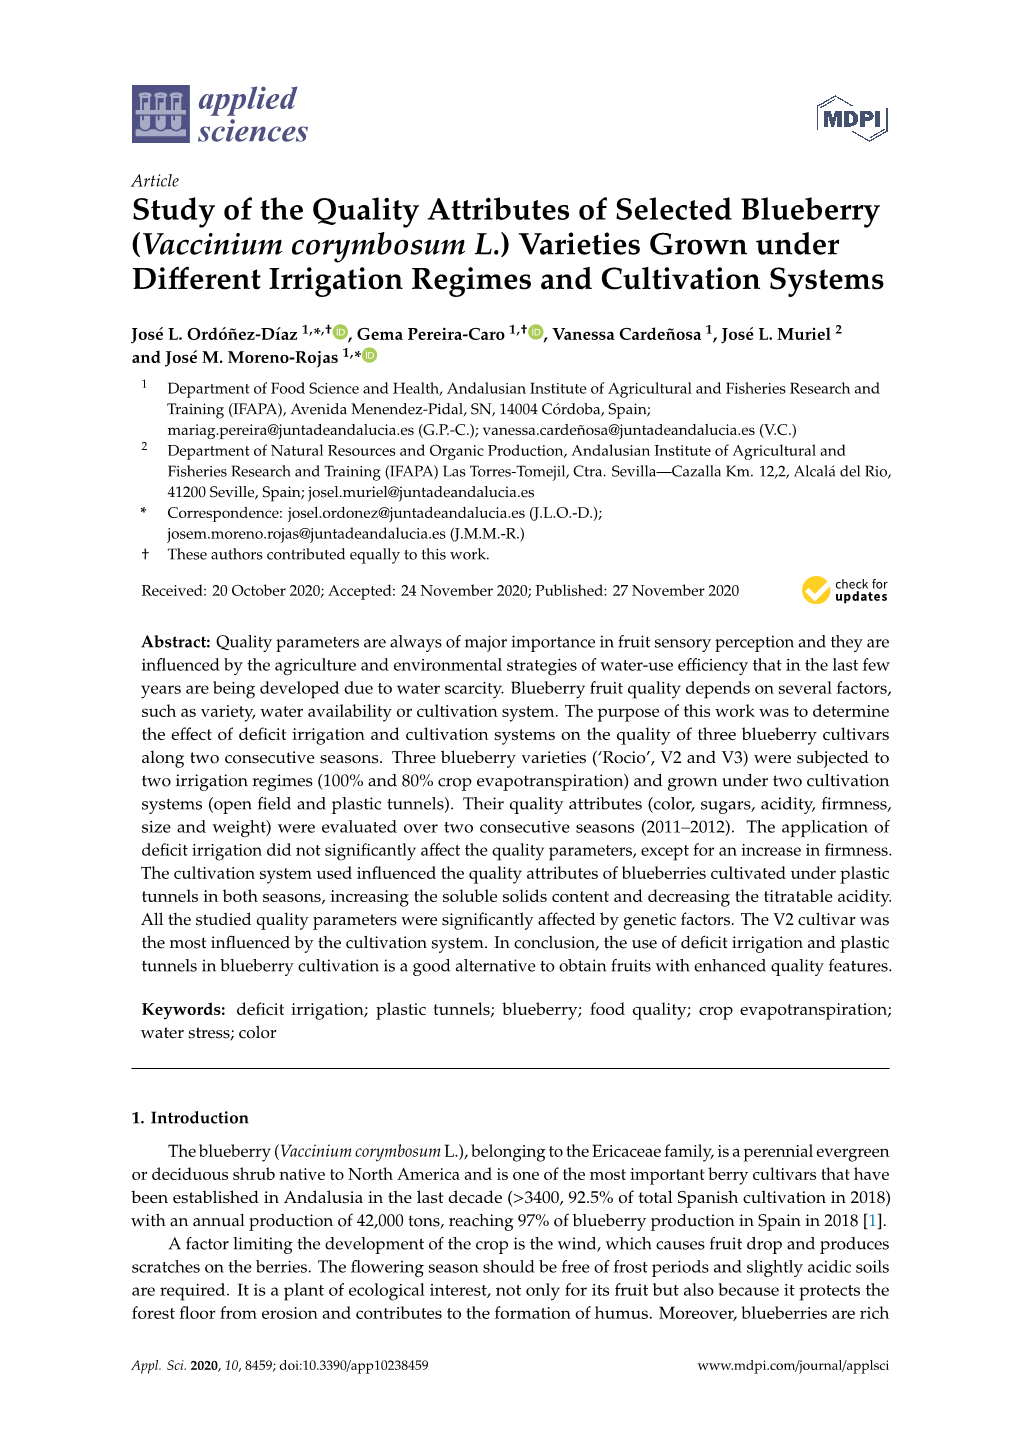 Study of the Quality Attributes of Selected Blueberry (Vaccinium Corymbosum L.) Varieties Grown Under Diﬀerent Irrigation Regimes and Cultivation Systems